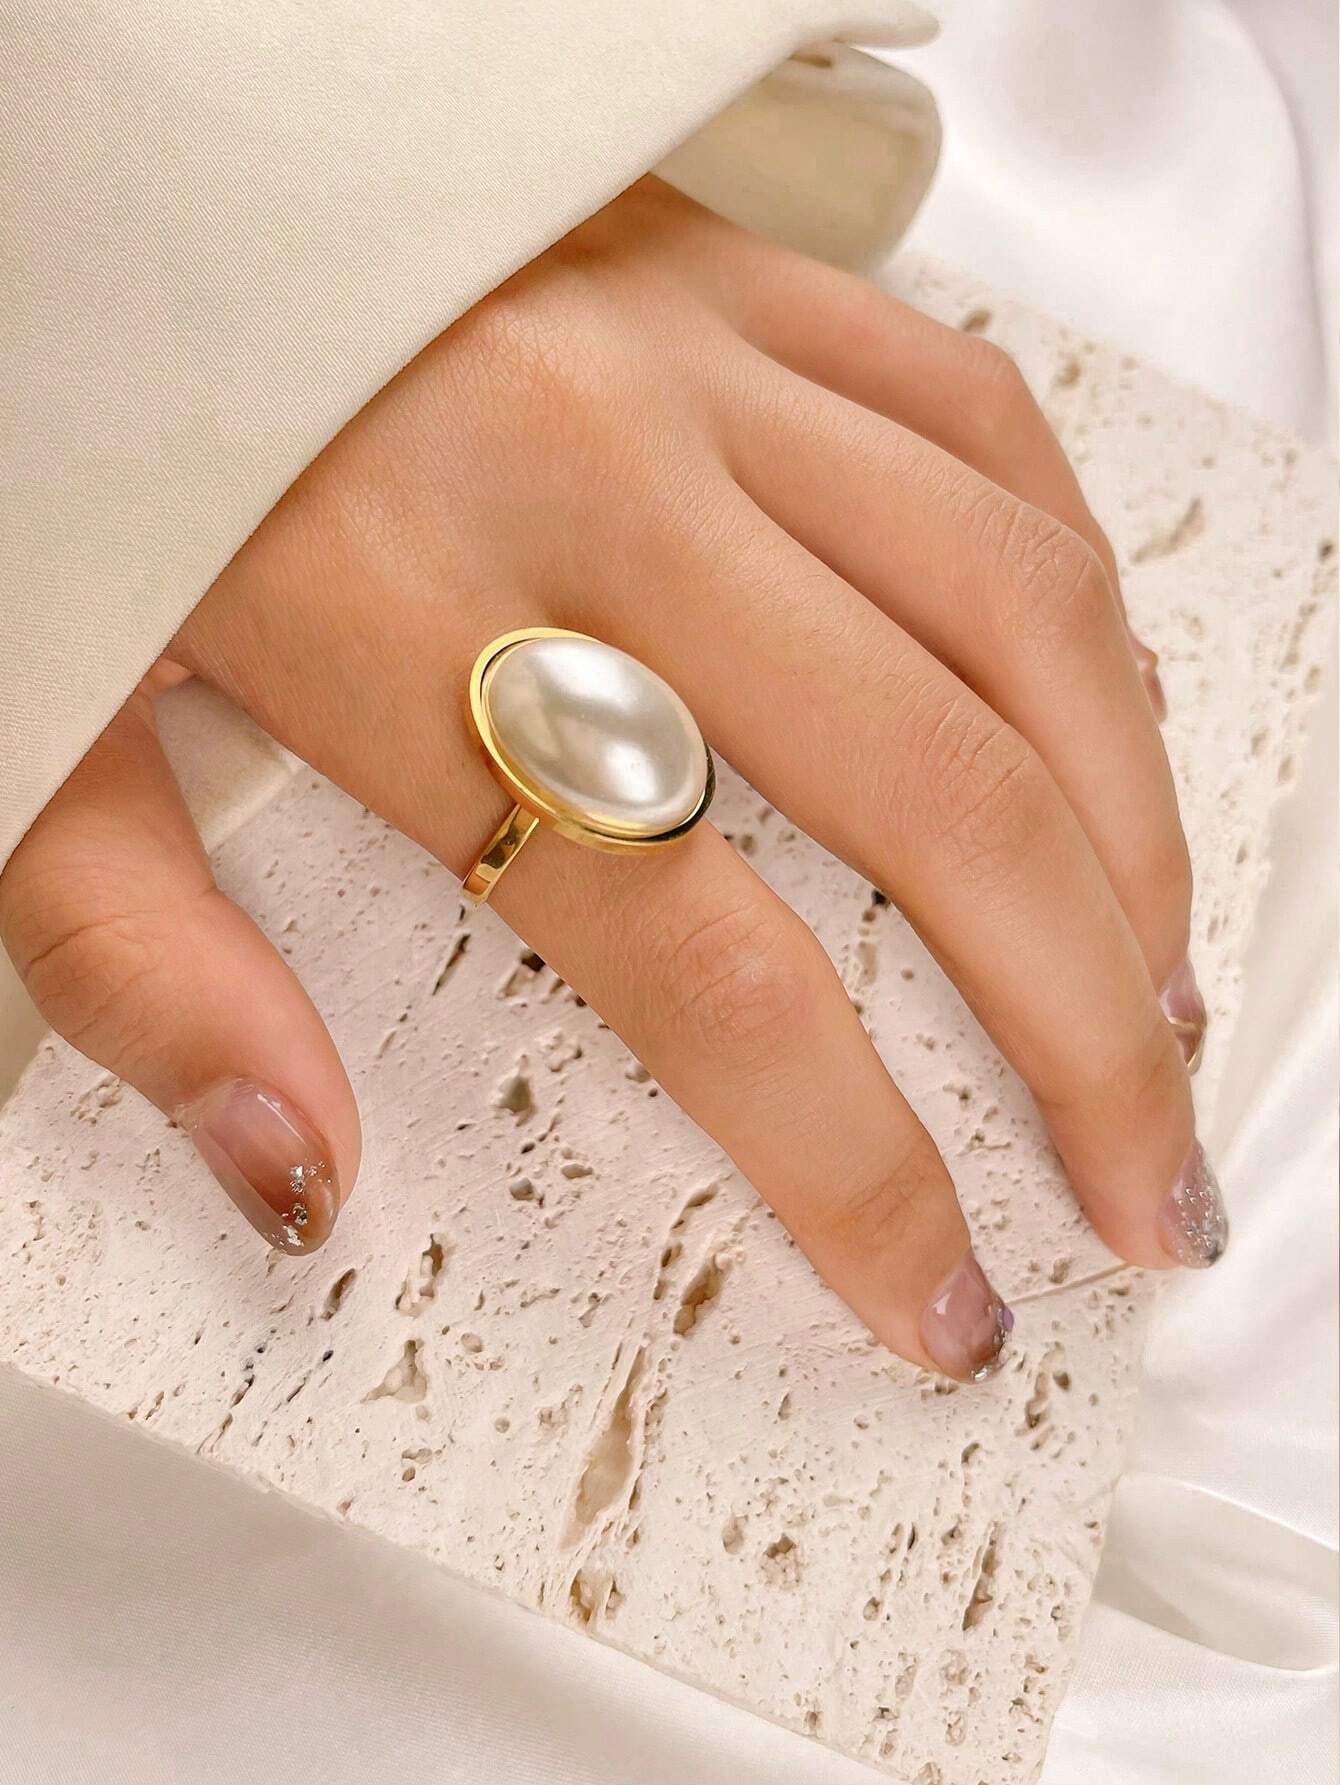 Imitation Pearl Ring Stainless Steel Ring